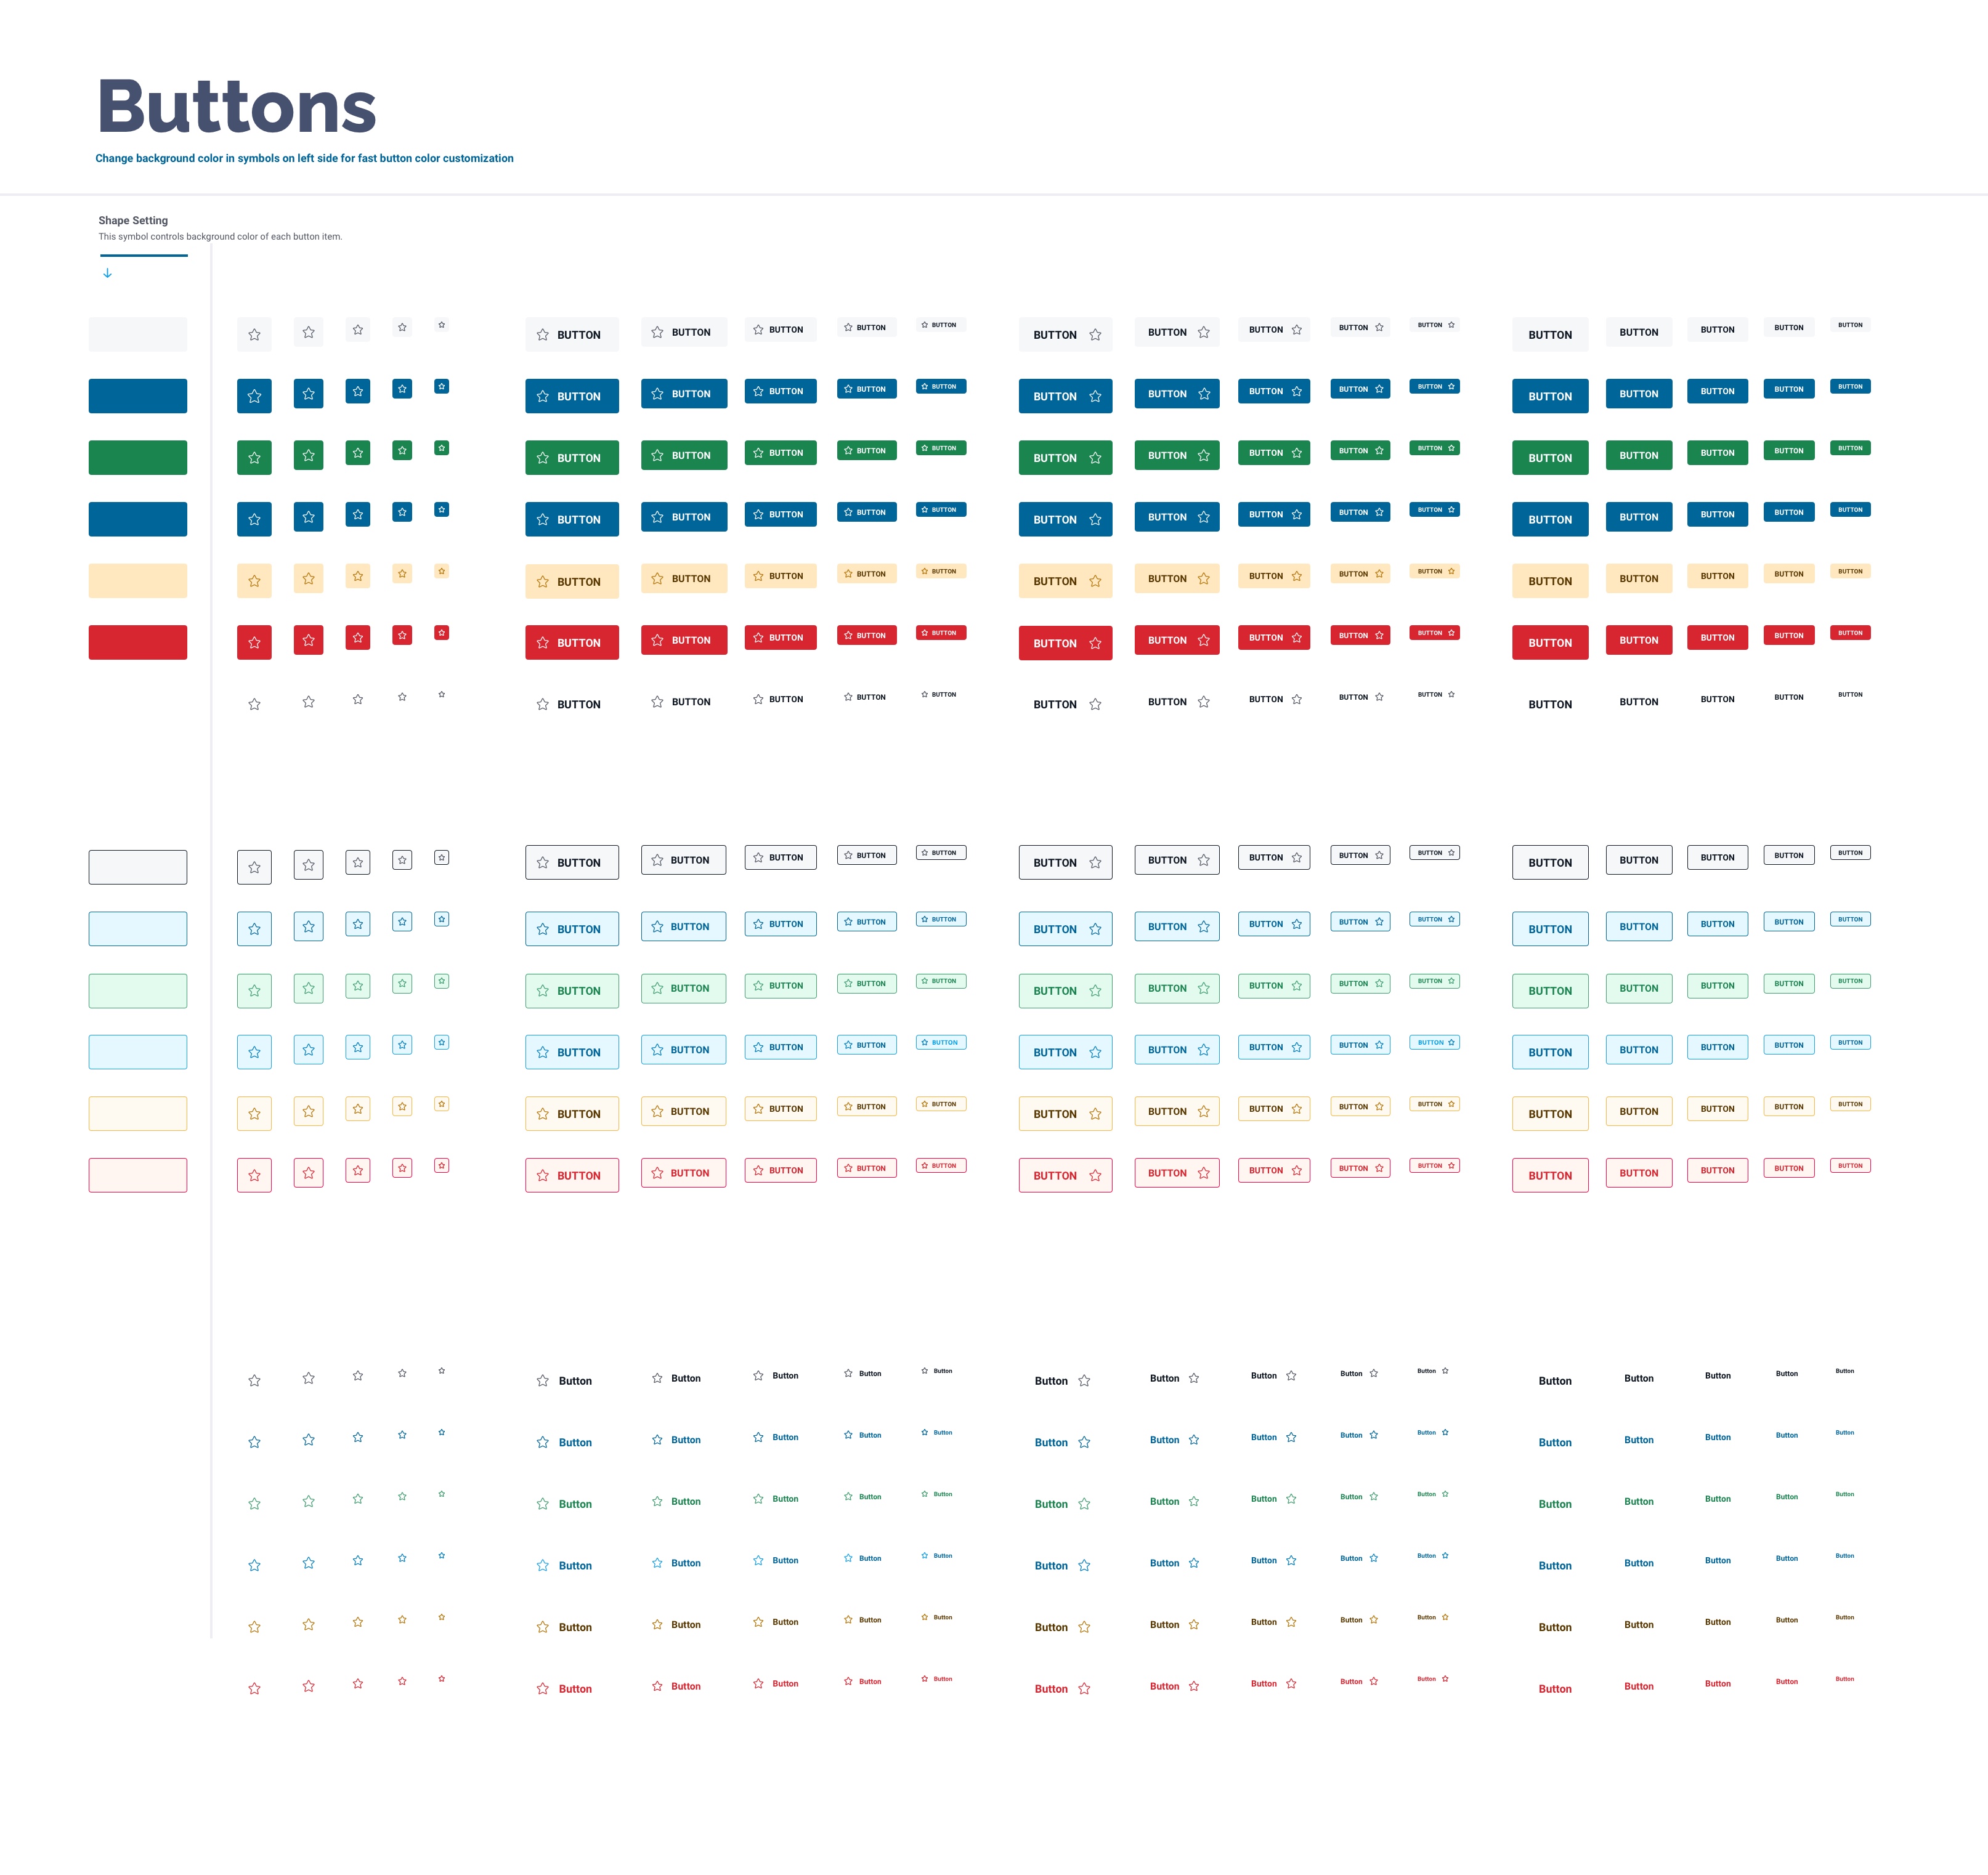 a sheet showing many different buttons states